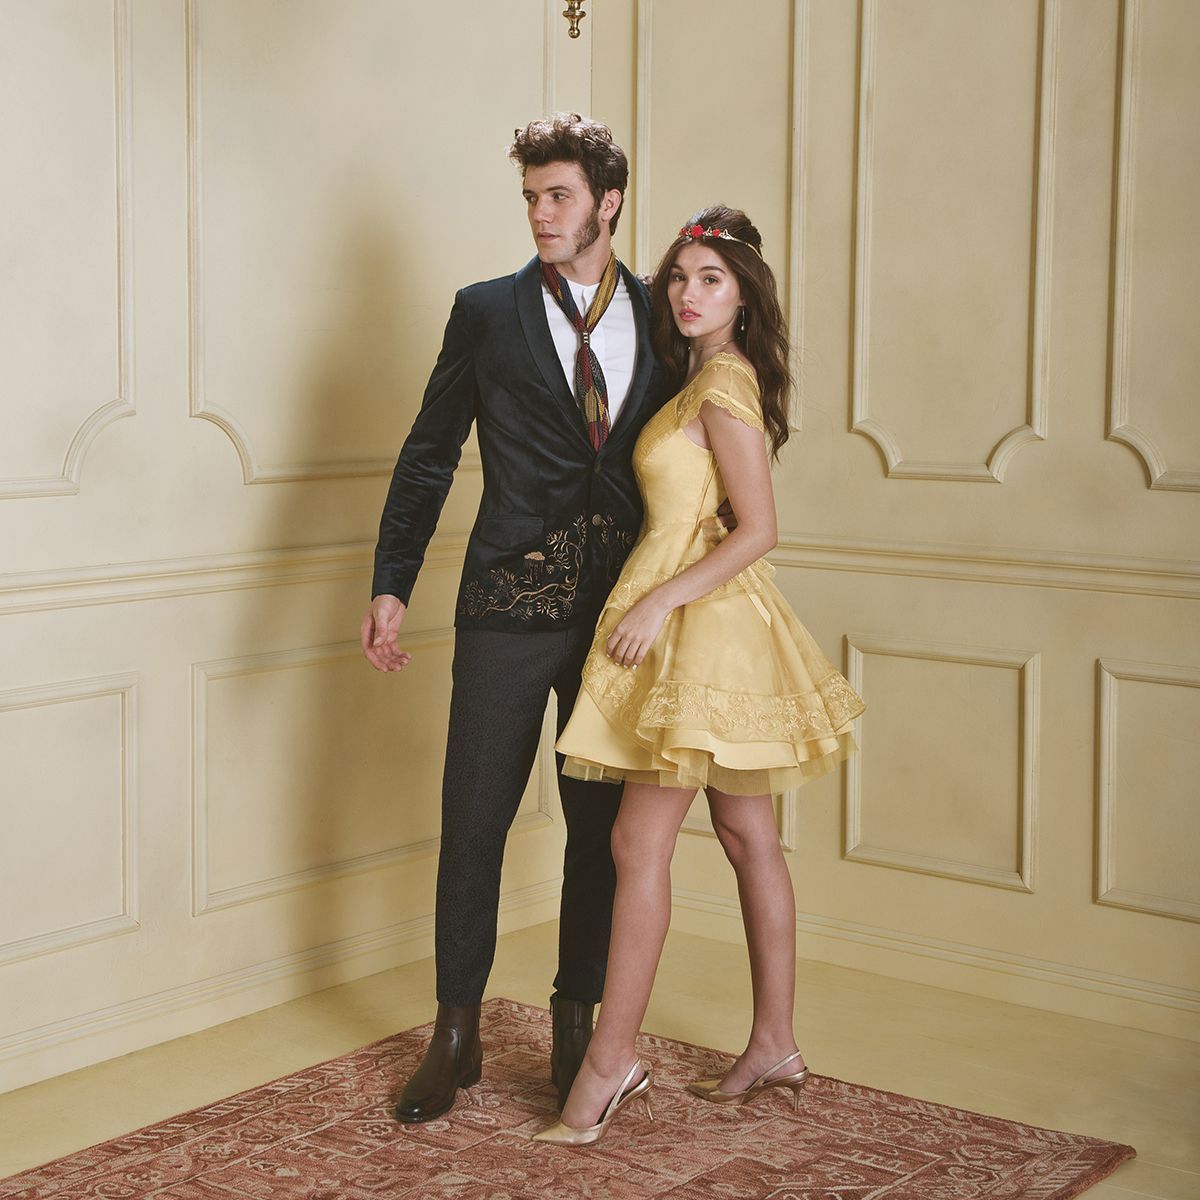 Sites-hottopic-Site -   19 beauty And The Beast costume ideas